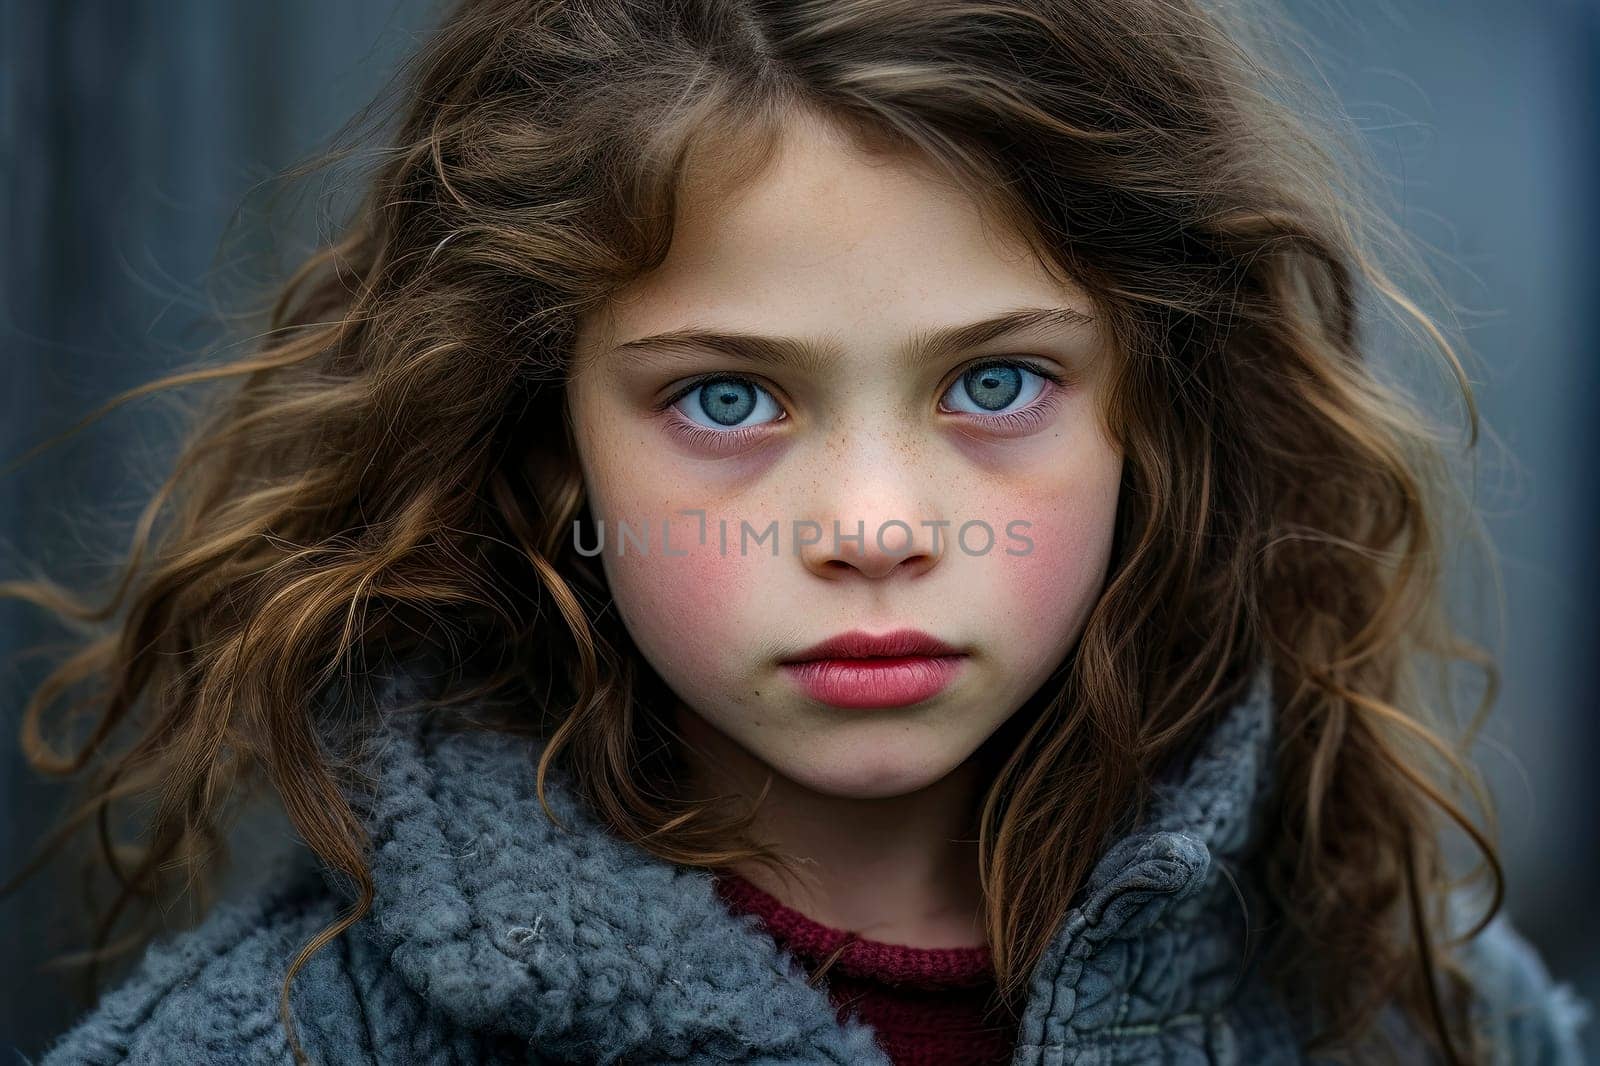 This mesmerizing photo captures the captivating gaze of a girl, drawing viewers into her world